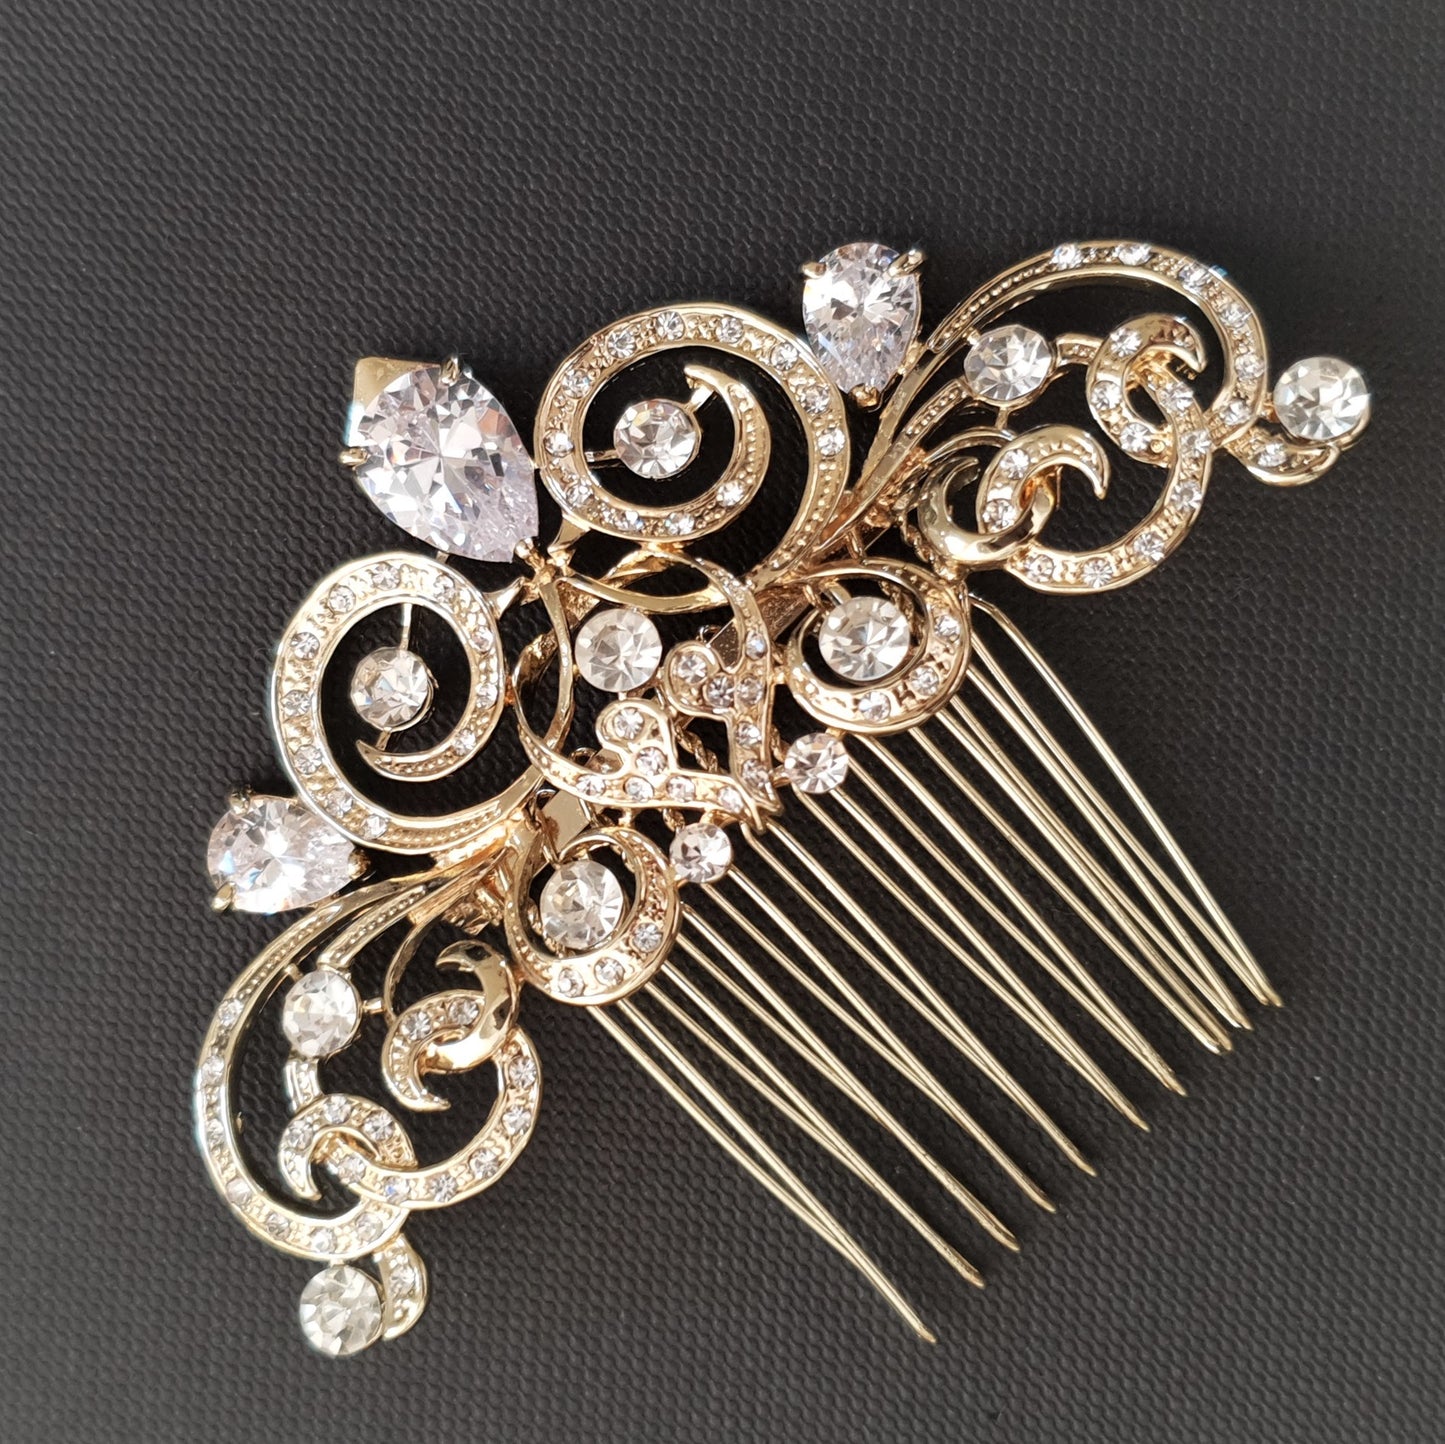 Decorative Victorian Style Bridal Hair Comb in Gold-Agatha